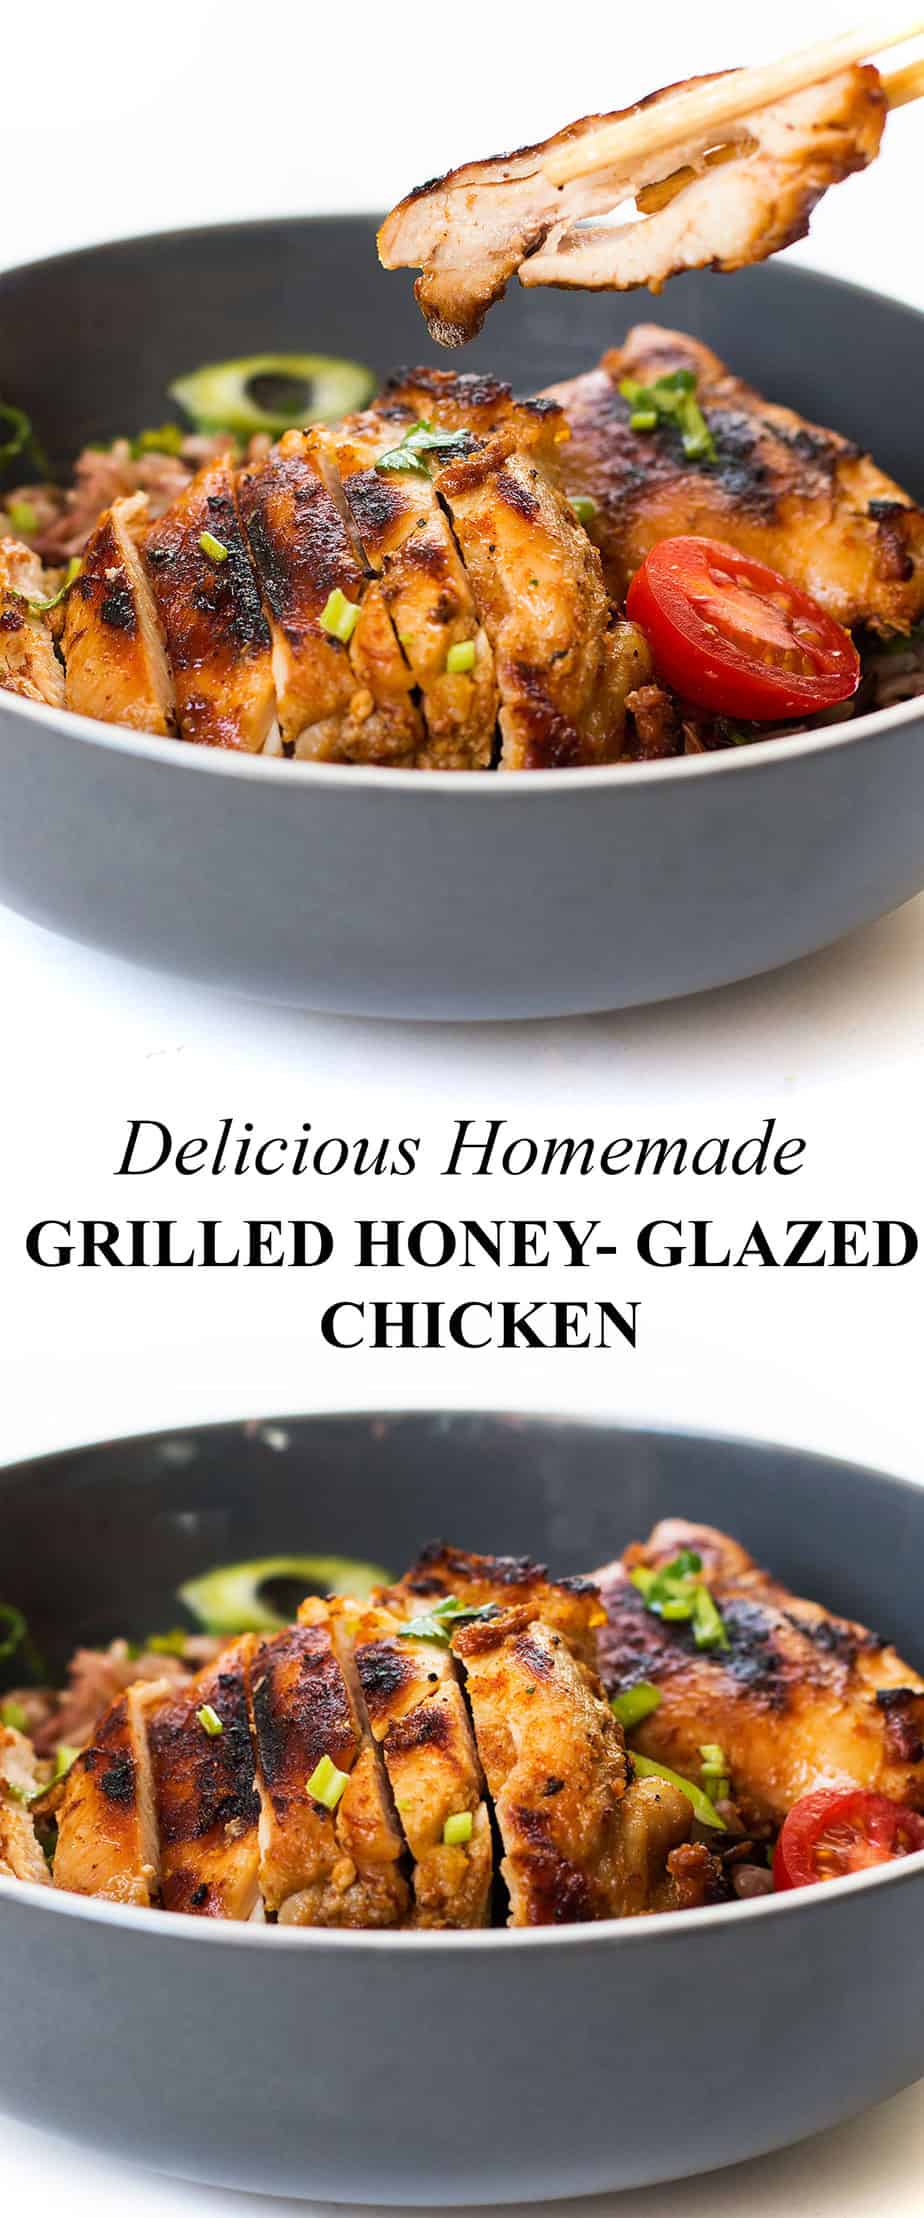 grilled-honey-glazed-chicken-recipe-pinterest. Make a quick and easy sauce for bites of boneless chicken breast. A touch of Mexican chili pepper adds kick .